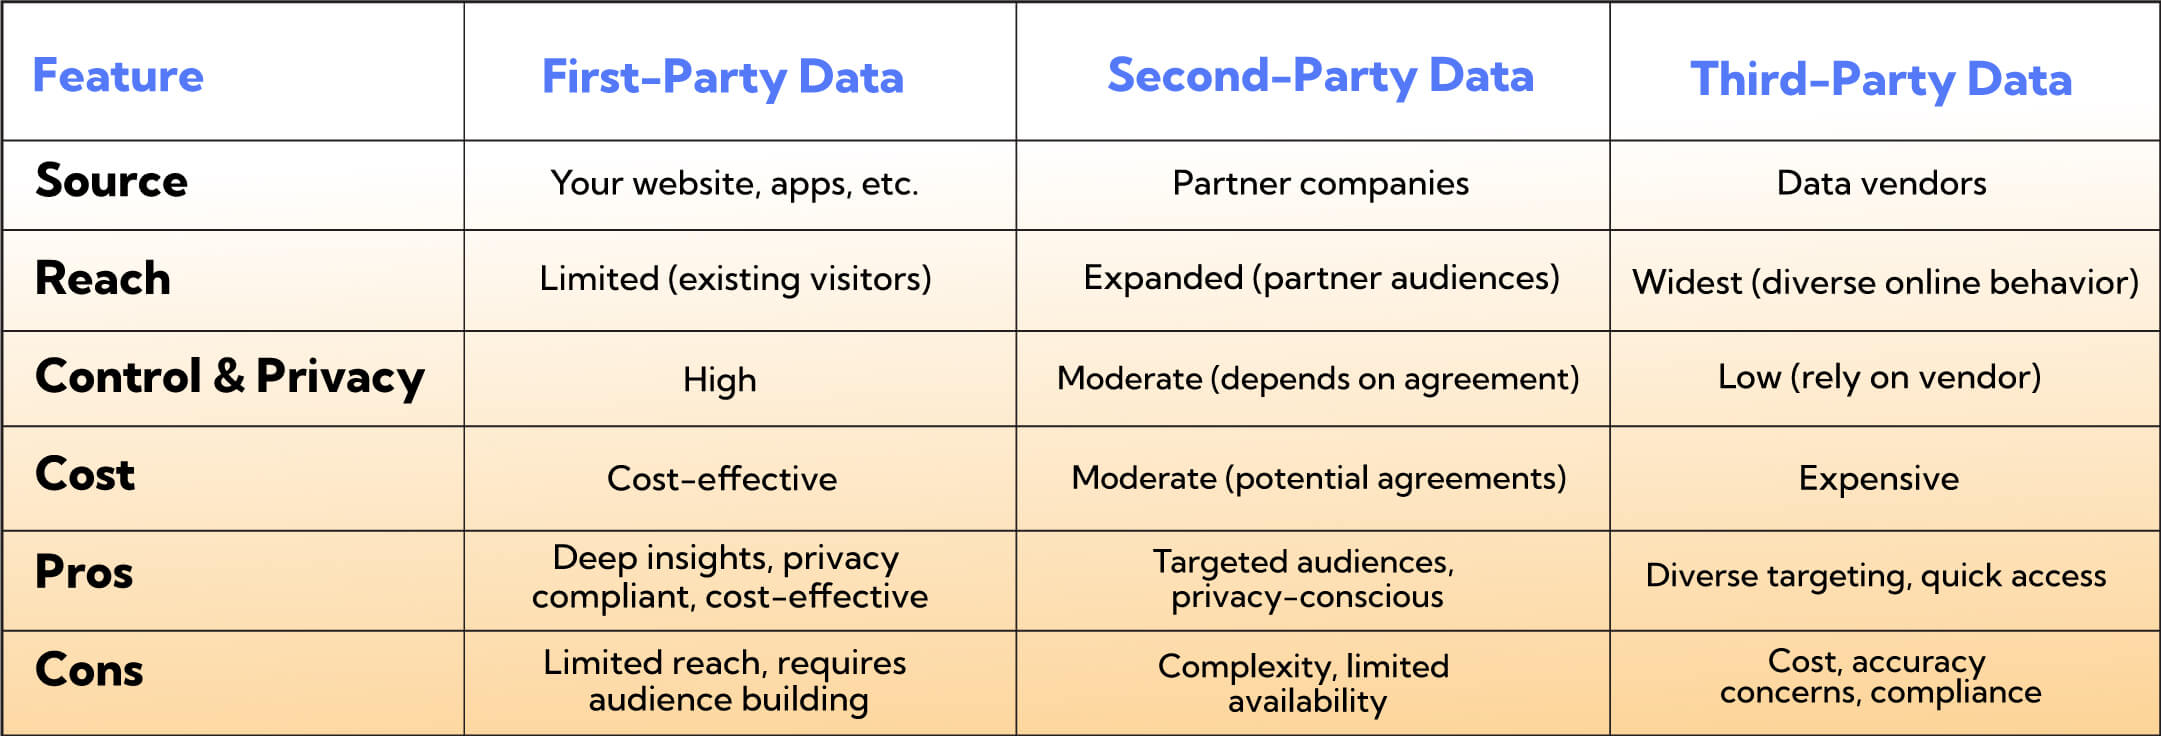 First Party, Second Party, Third Party Intent Data